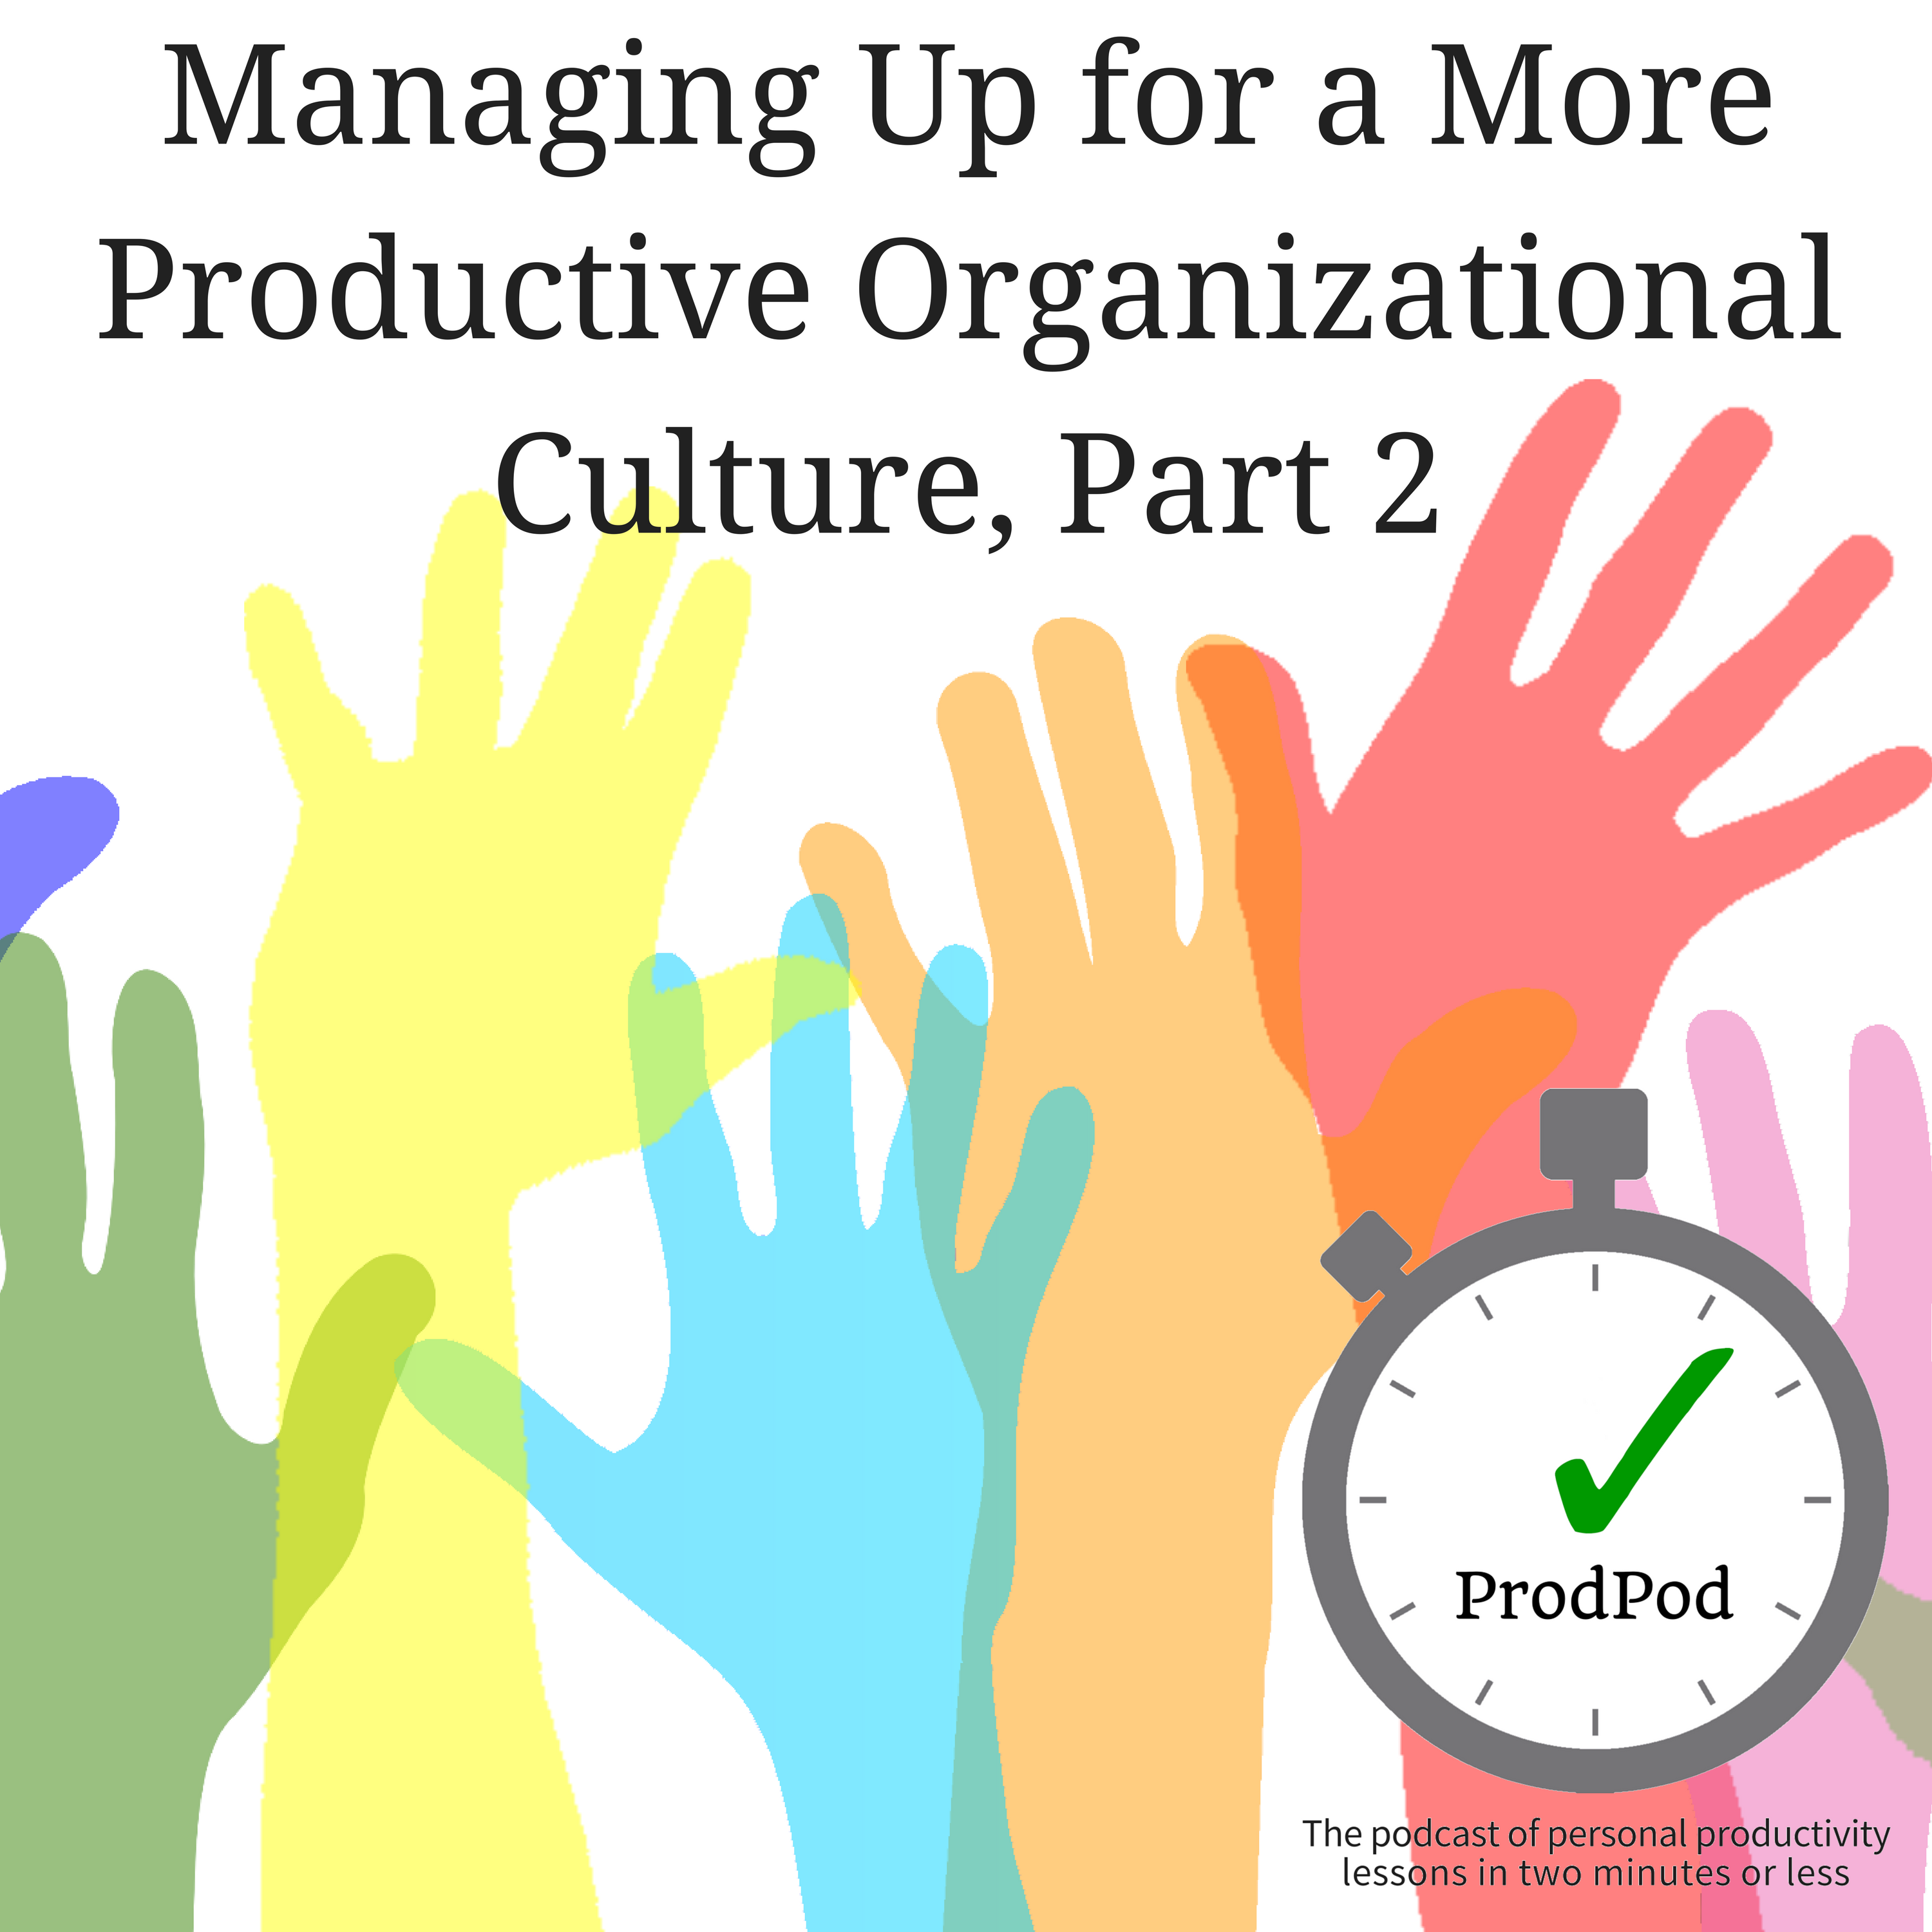 ProdPod: Episode 103 -- Managing Up for a More Productive Organizational Culture, Part 2